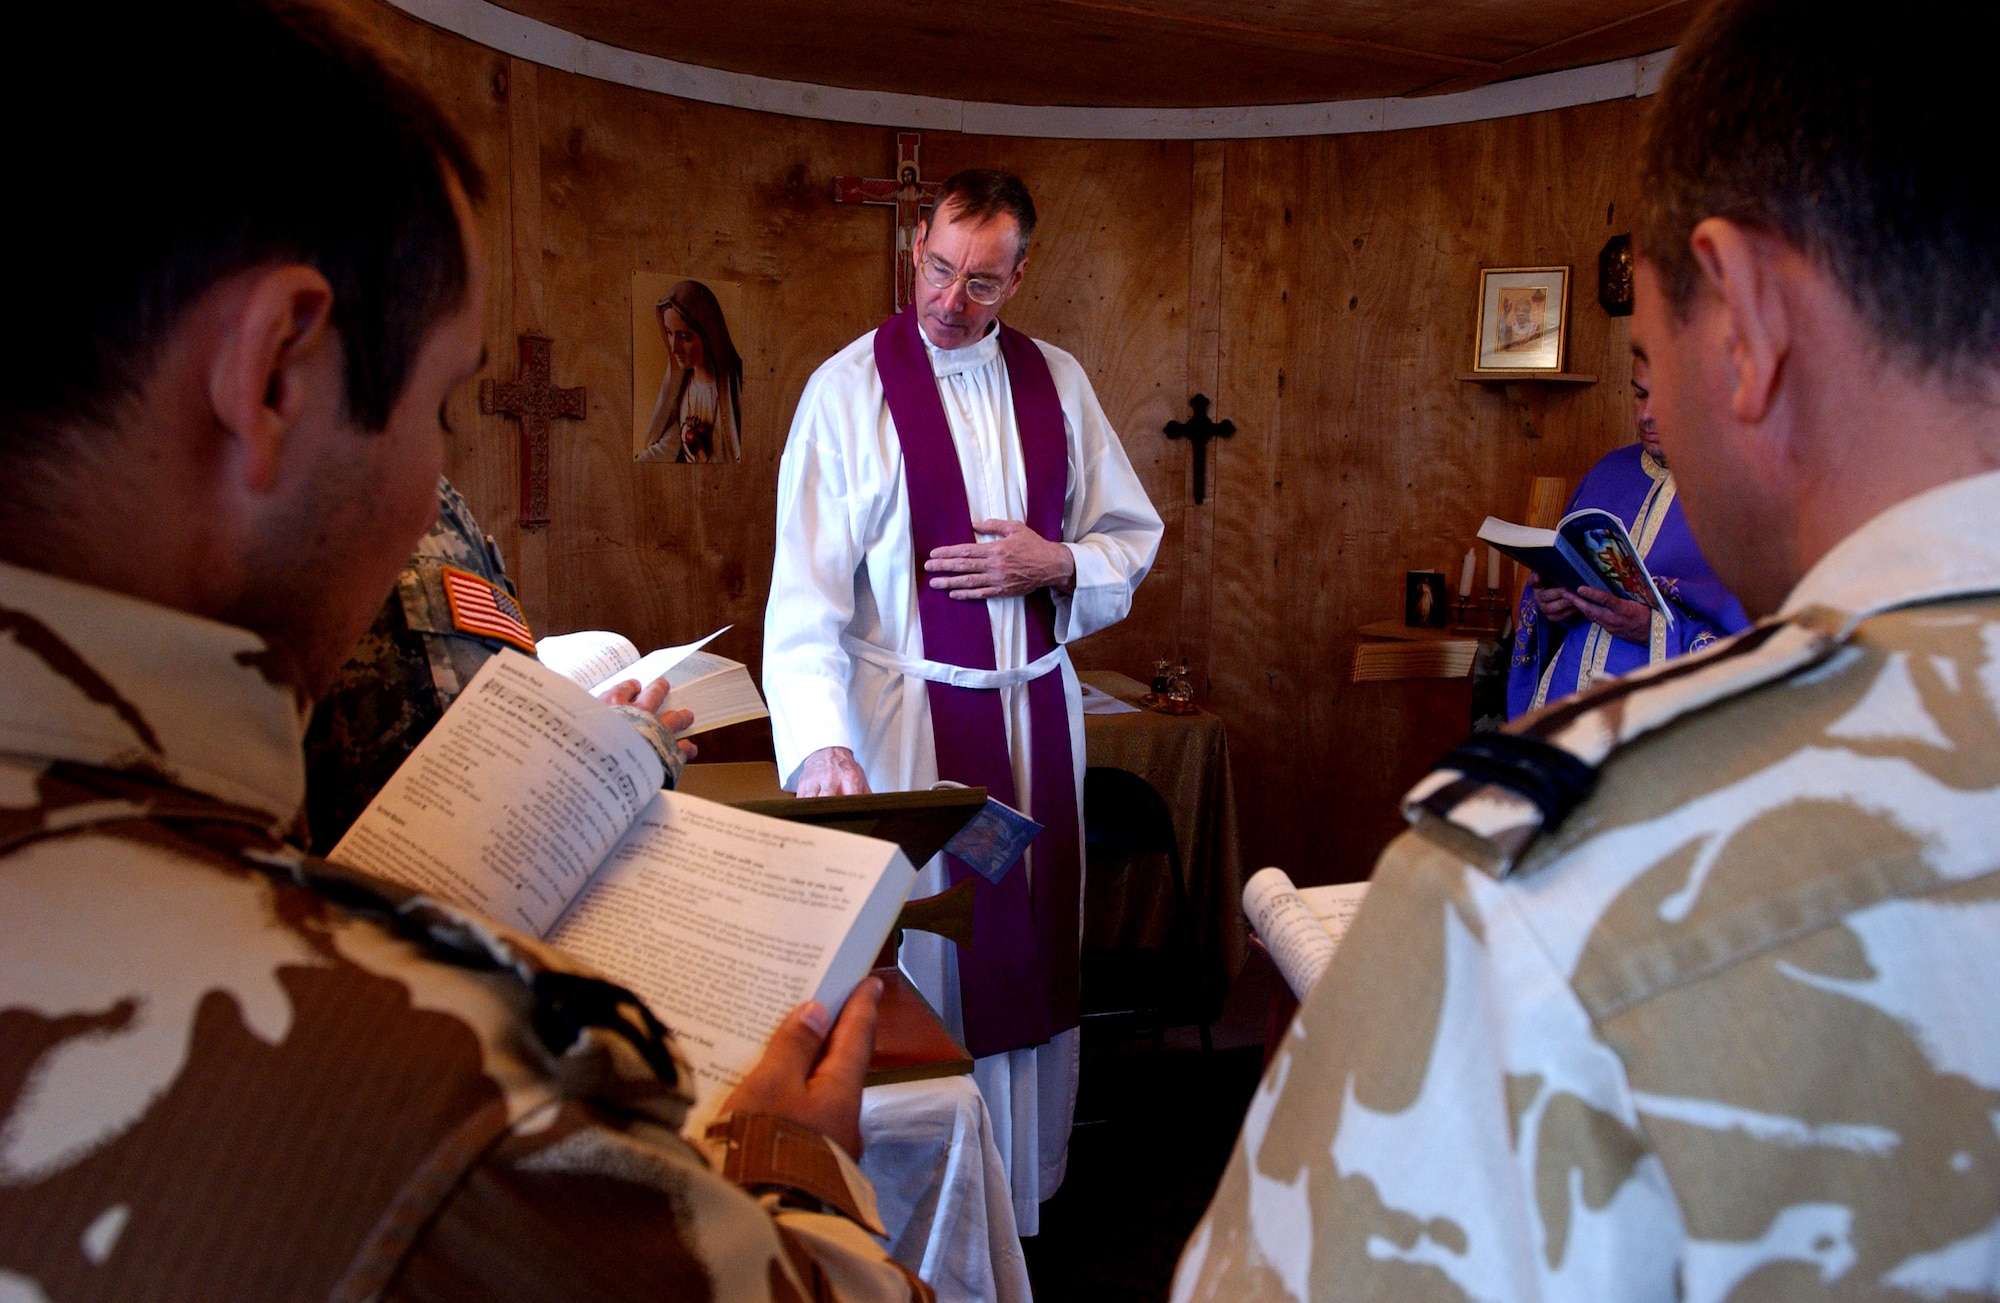 Chaplain (Maj.) Timothy Hirten reads a prayer while Warrant Officer Ionut Gabriel Mittelbrun, left, and Lt. Col. Marian Popa, follow along with the reading Dec. 5 at the Romanian chapel on Ali Base, Iraq. Chaplain Hirten volunteers his time to help lead a Catholic Mass for coalition forces at the Romanian camp. The chaplain is assigned to the 407th Air Expeditionary Group Chapel and is deployed from Altus Air Force Base, Okla. Warrant Officer Mittelbrun and Colonel Popa are both assigned to the Romanian Army. (U.S. Air Force photo/Airman 1st Class Jonathan Snyder) 